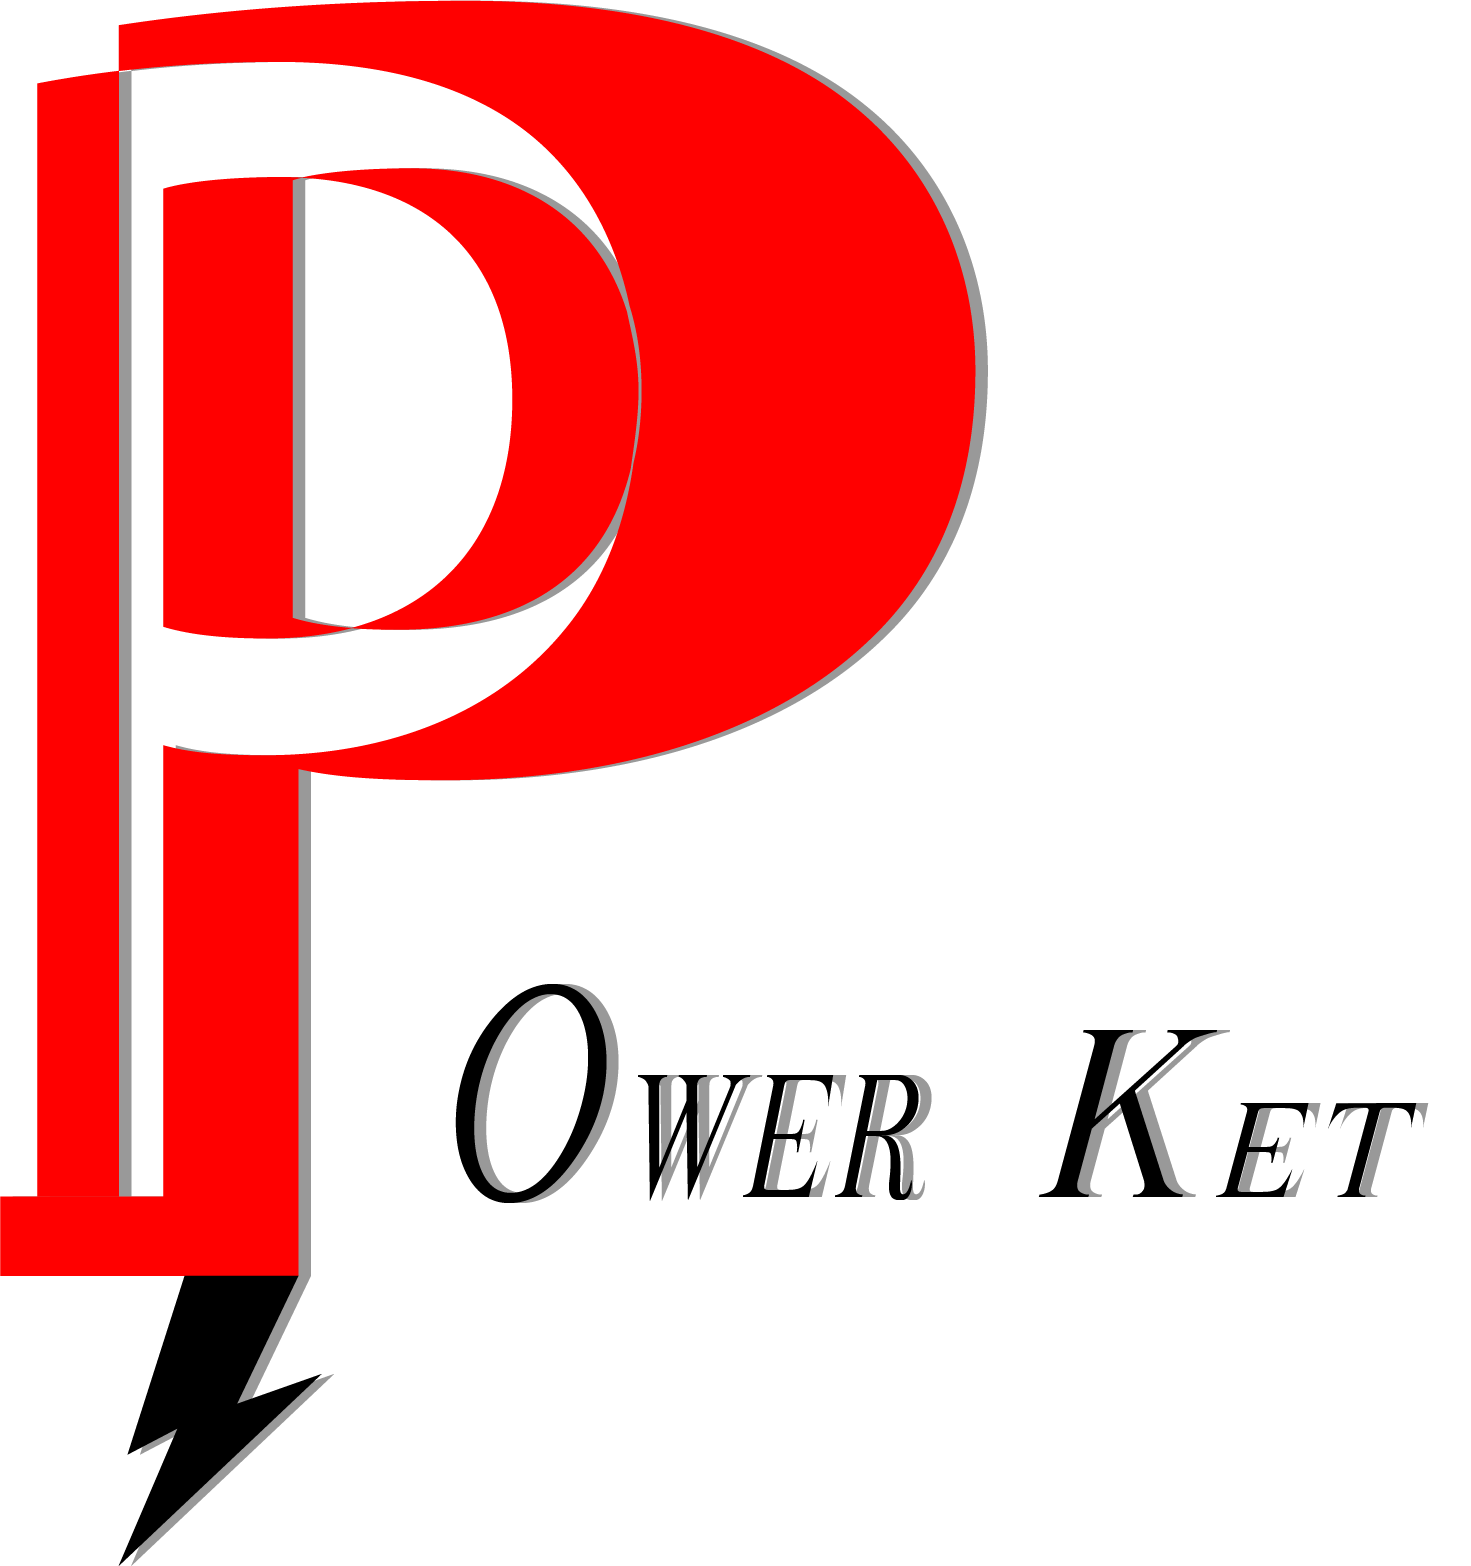 power-ket for engineering and systems